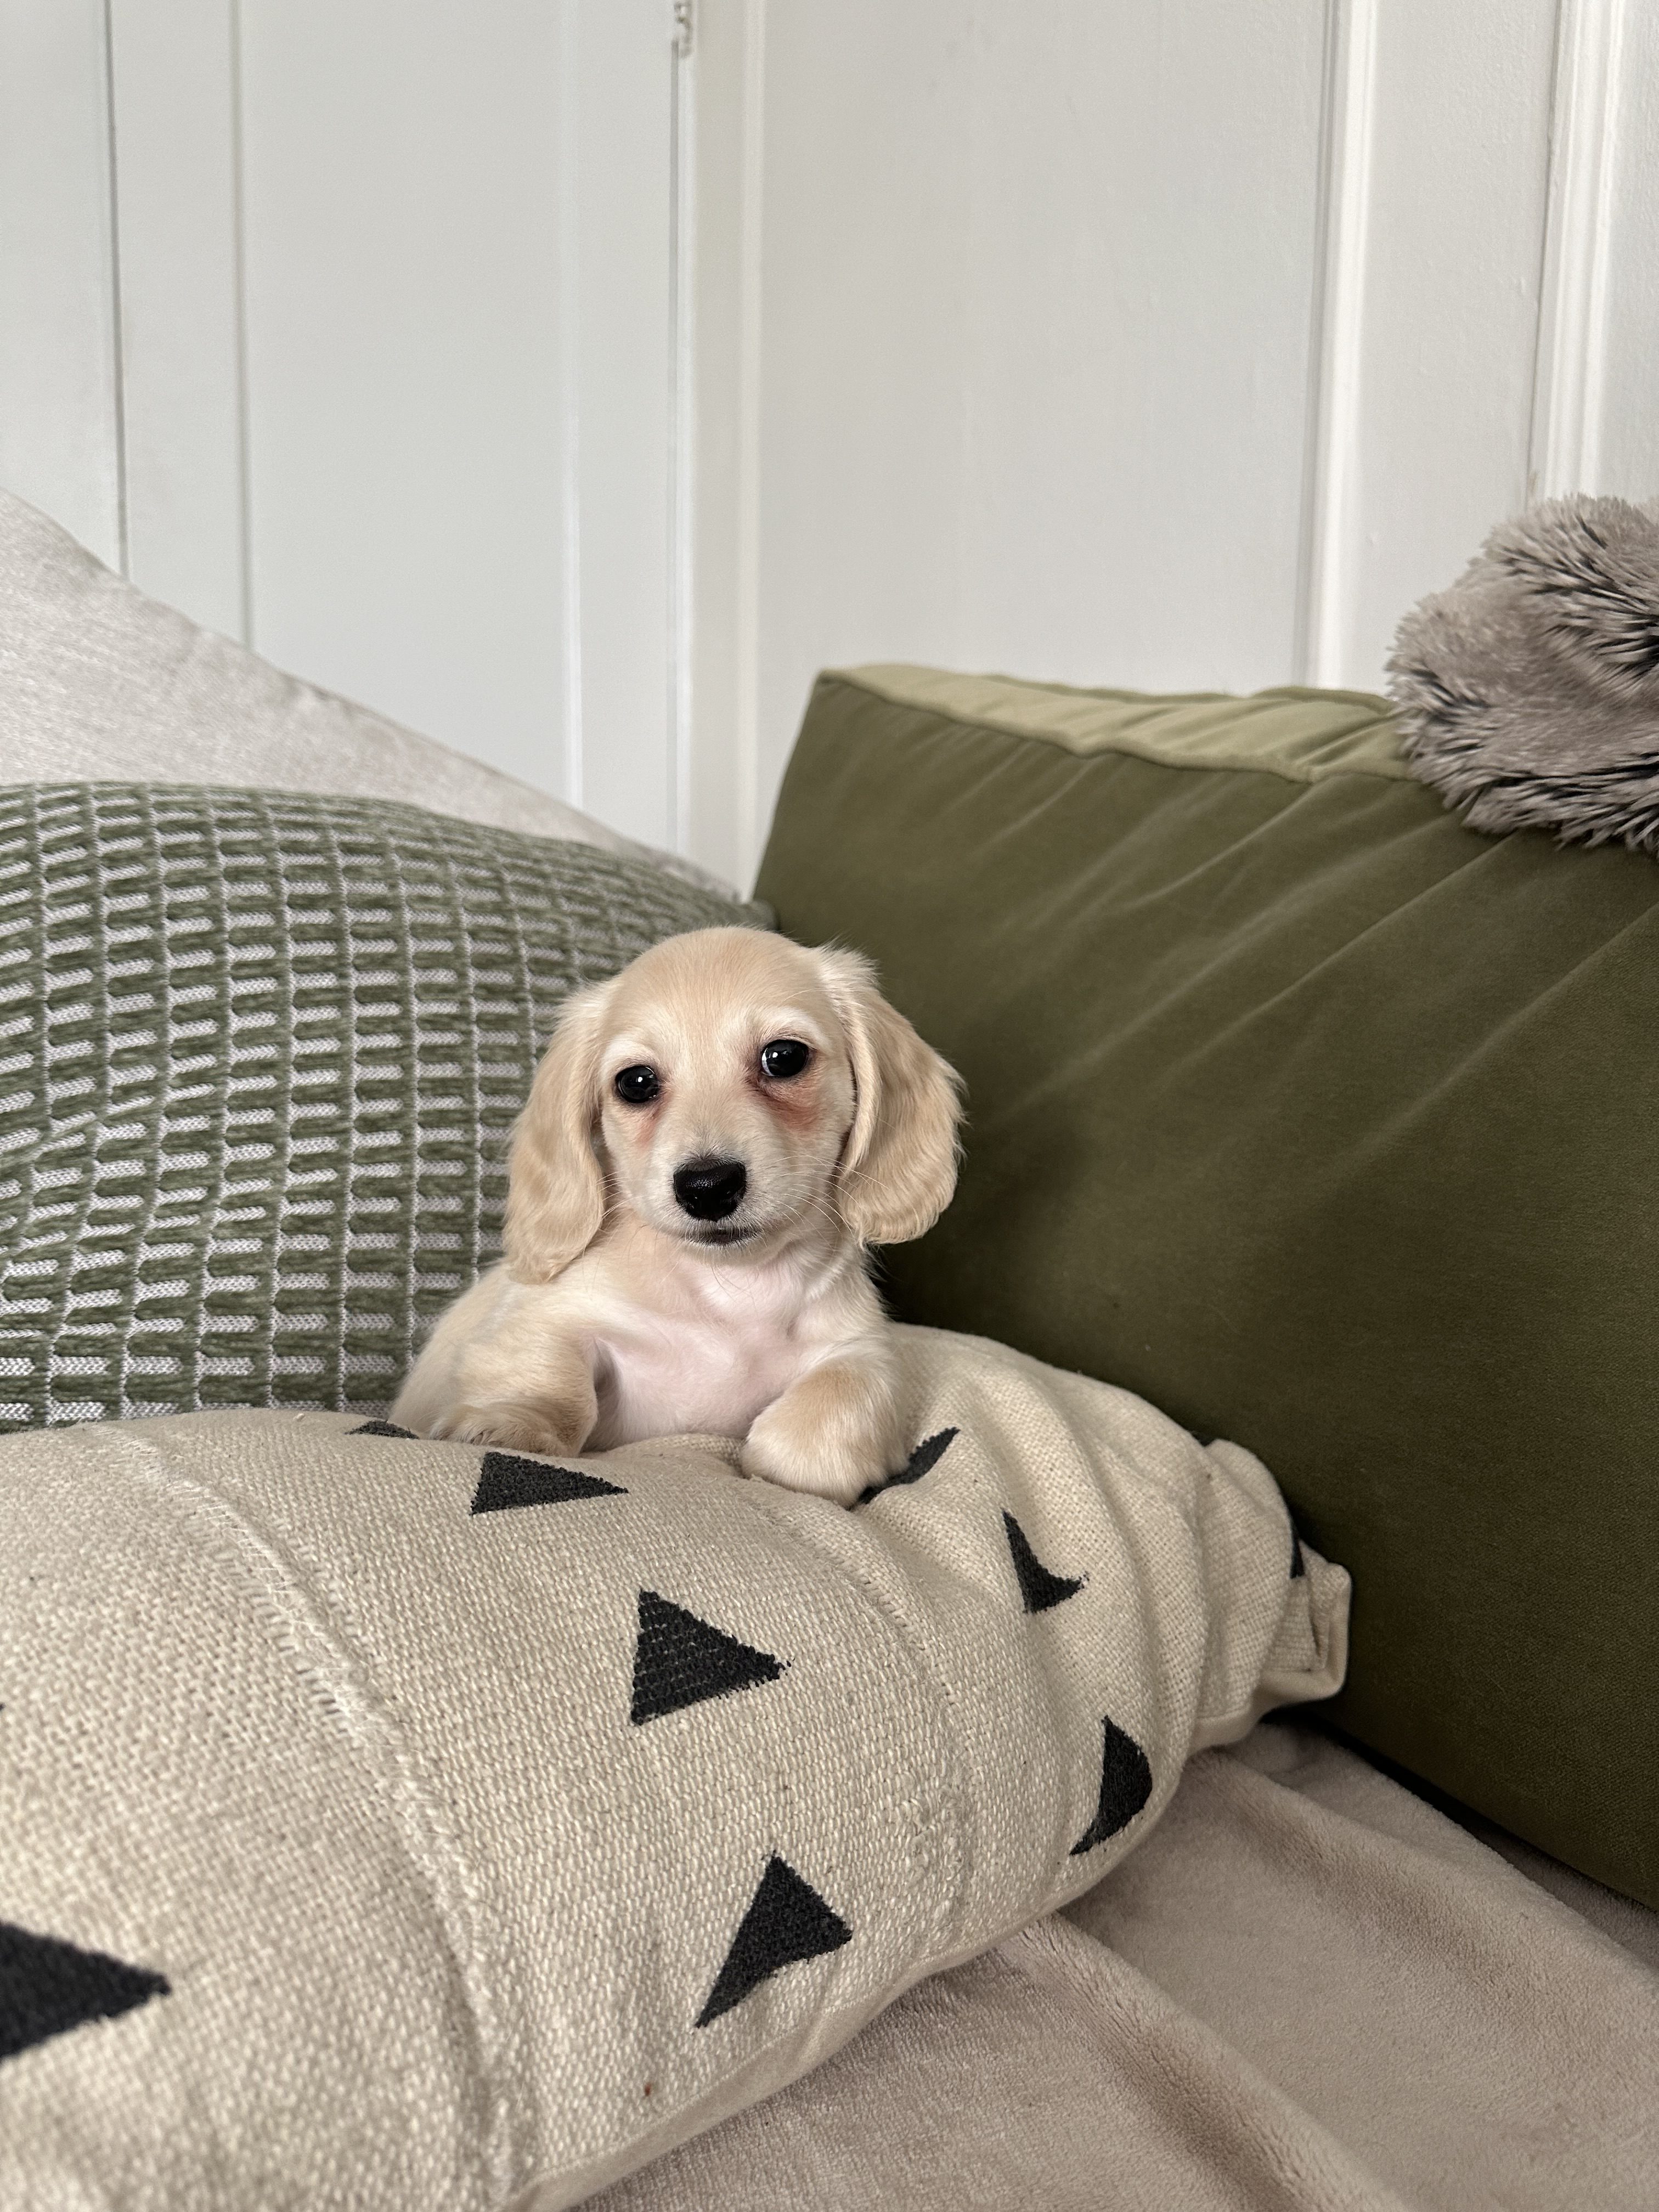 A small, light-colored puppy is nestled between two patterned pillows, one green and one with black triangles on beige. The background features white wooden paneling.